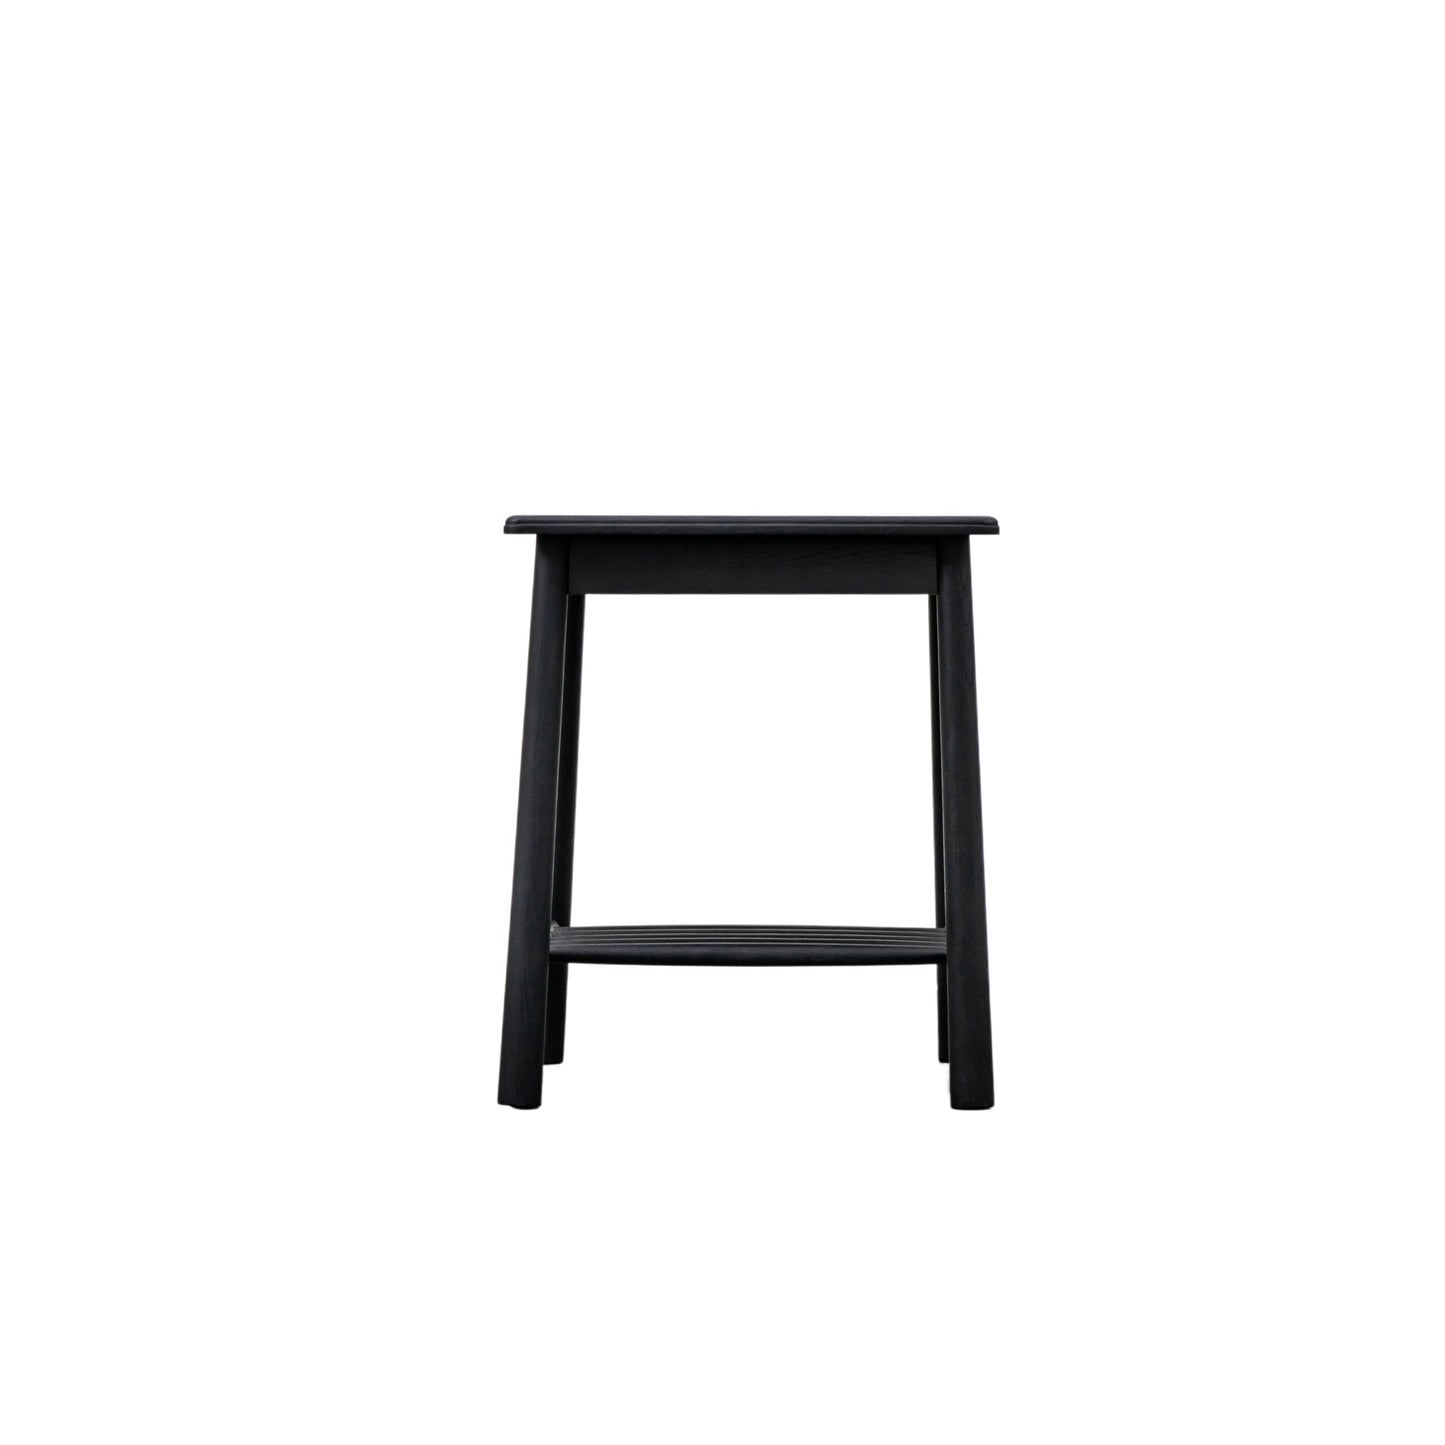 Wycombe Side Table Black 500x500x600mm